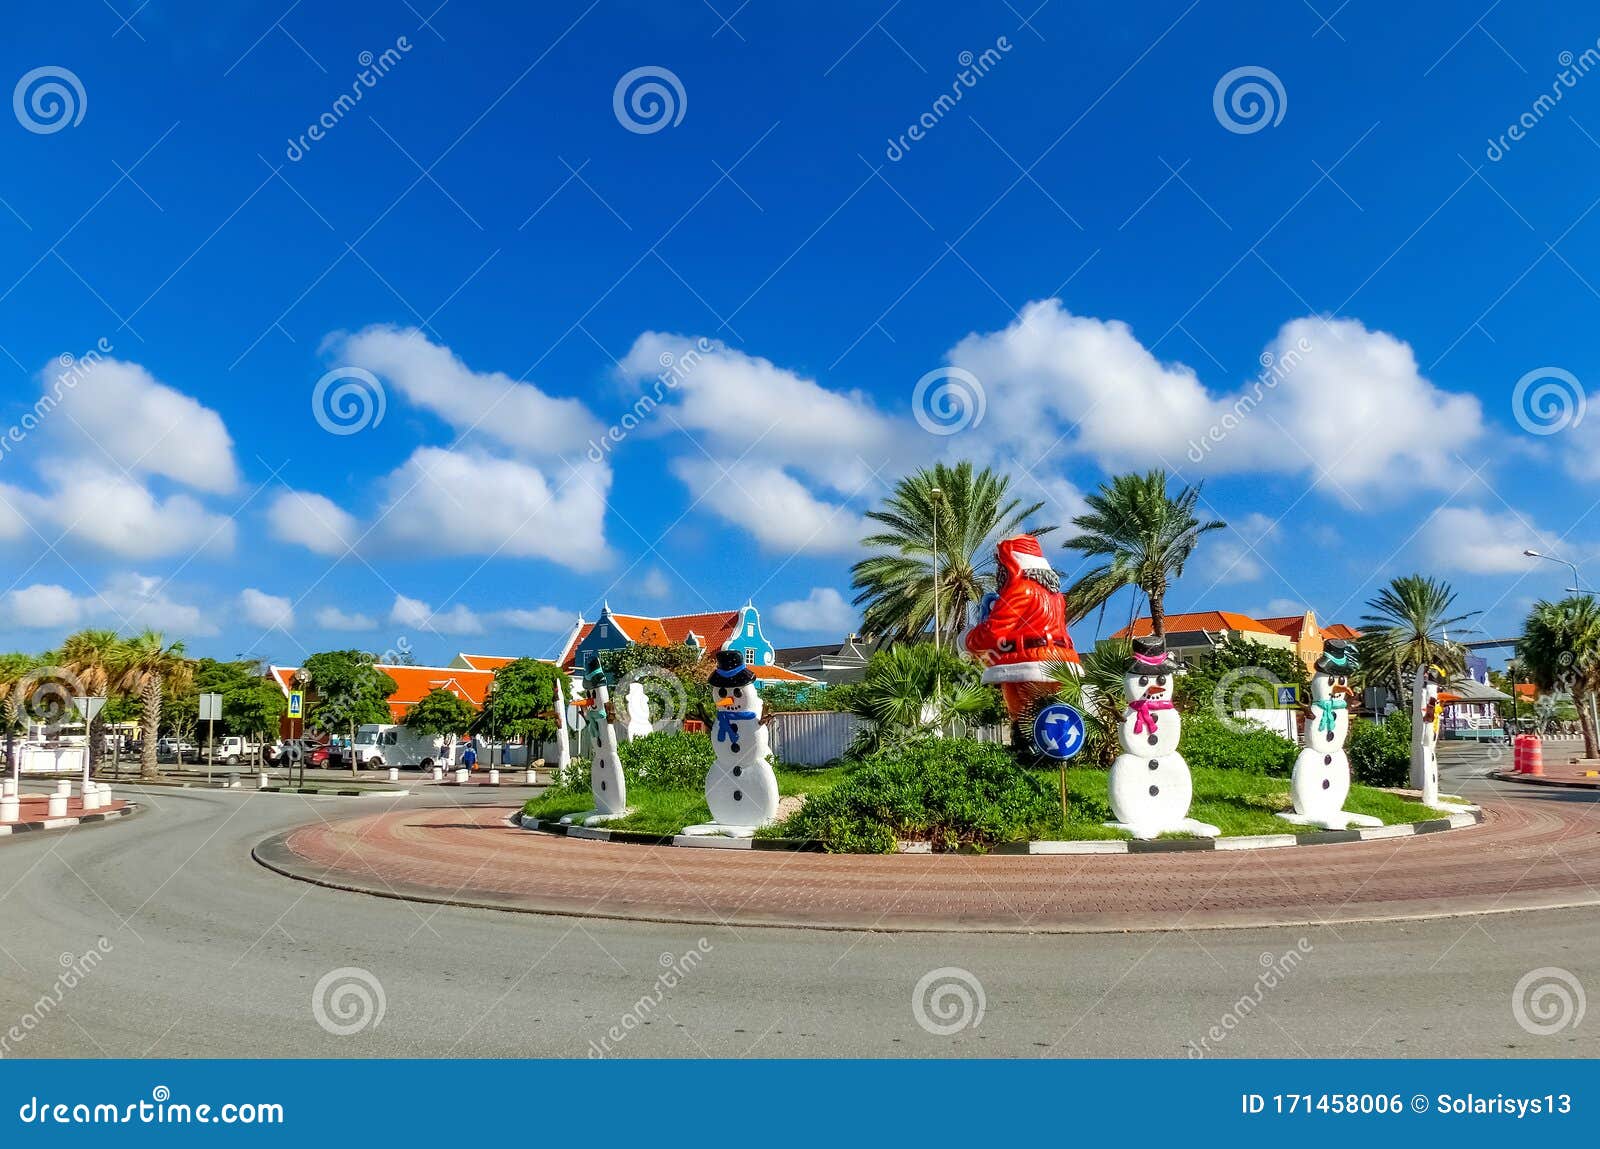 https://thumbs.dreamstime.com/z/christmas-decorations-willemstad-caribbean-island-curacao-view-around-171458006.jpg